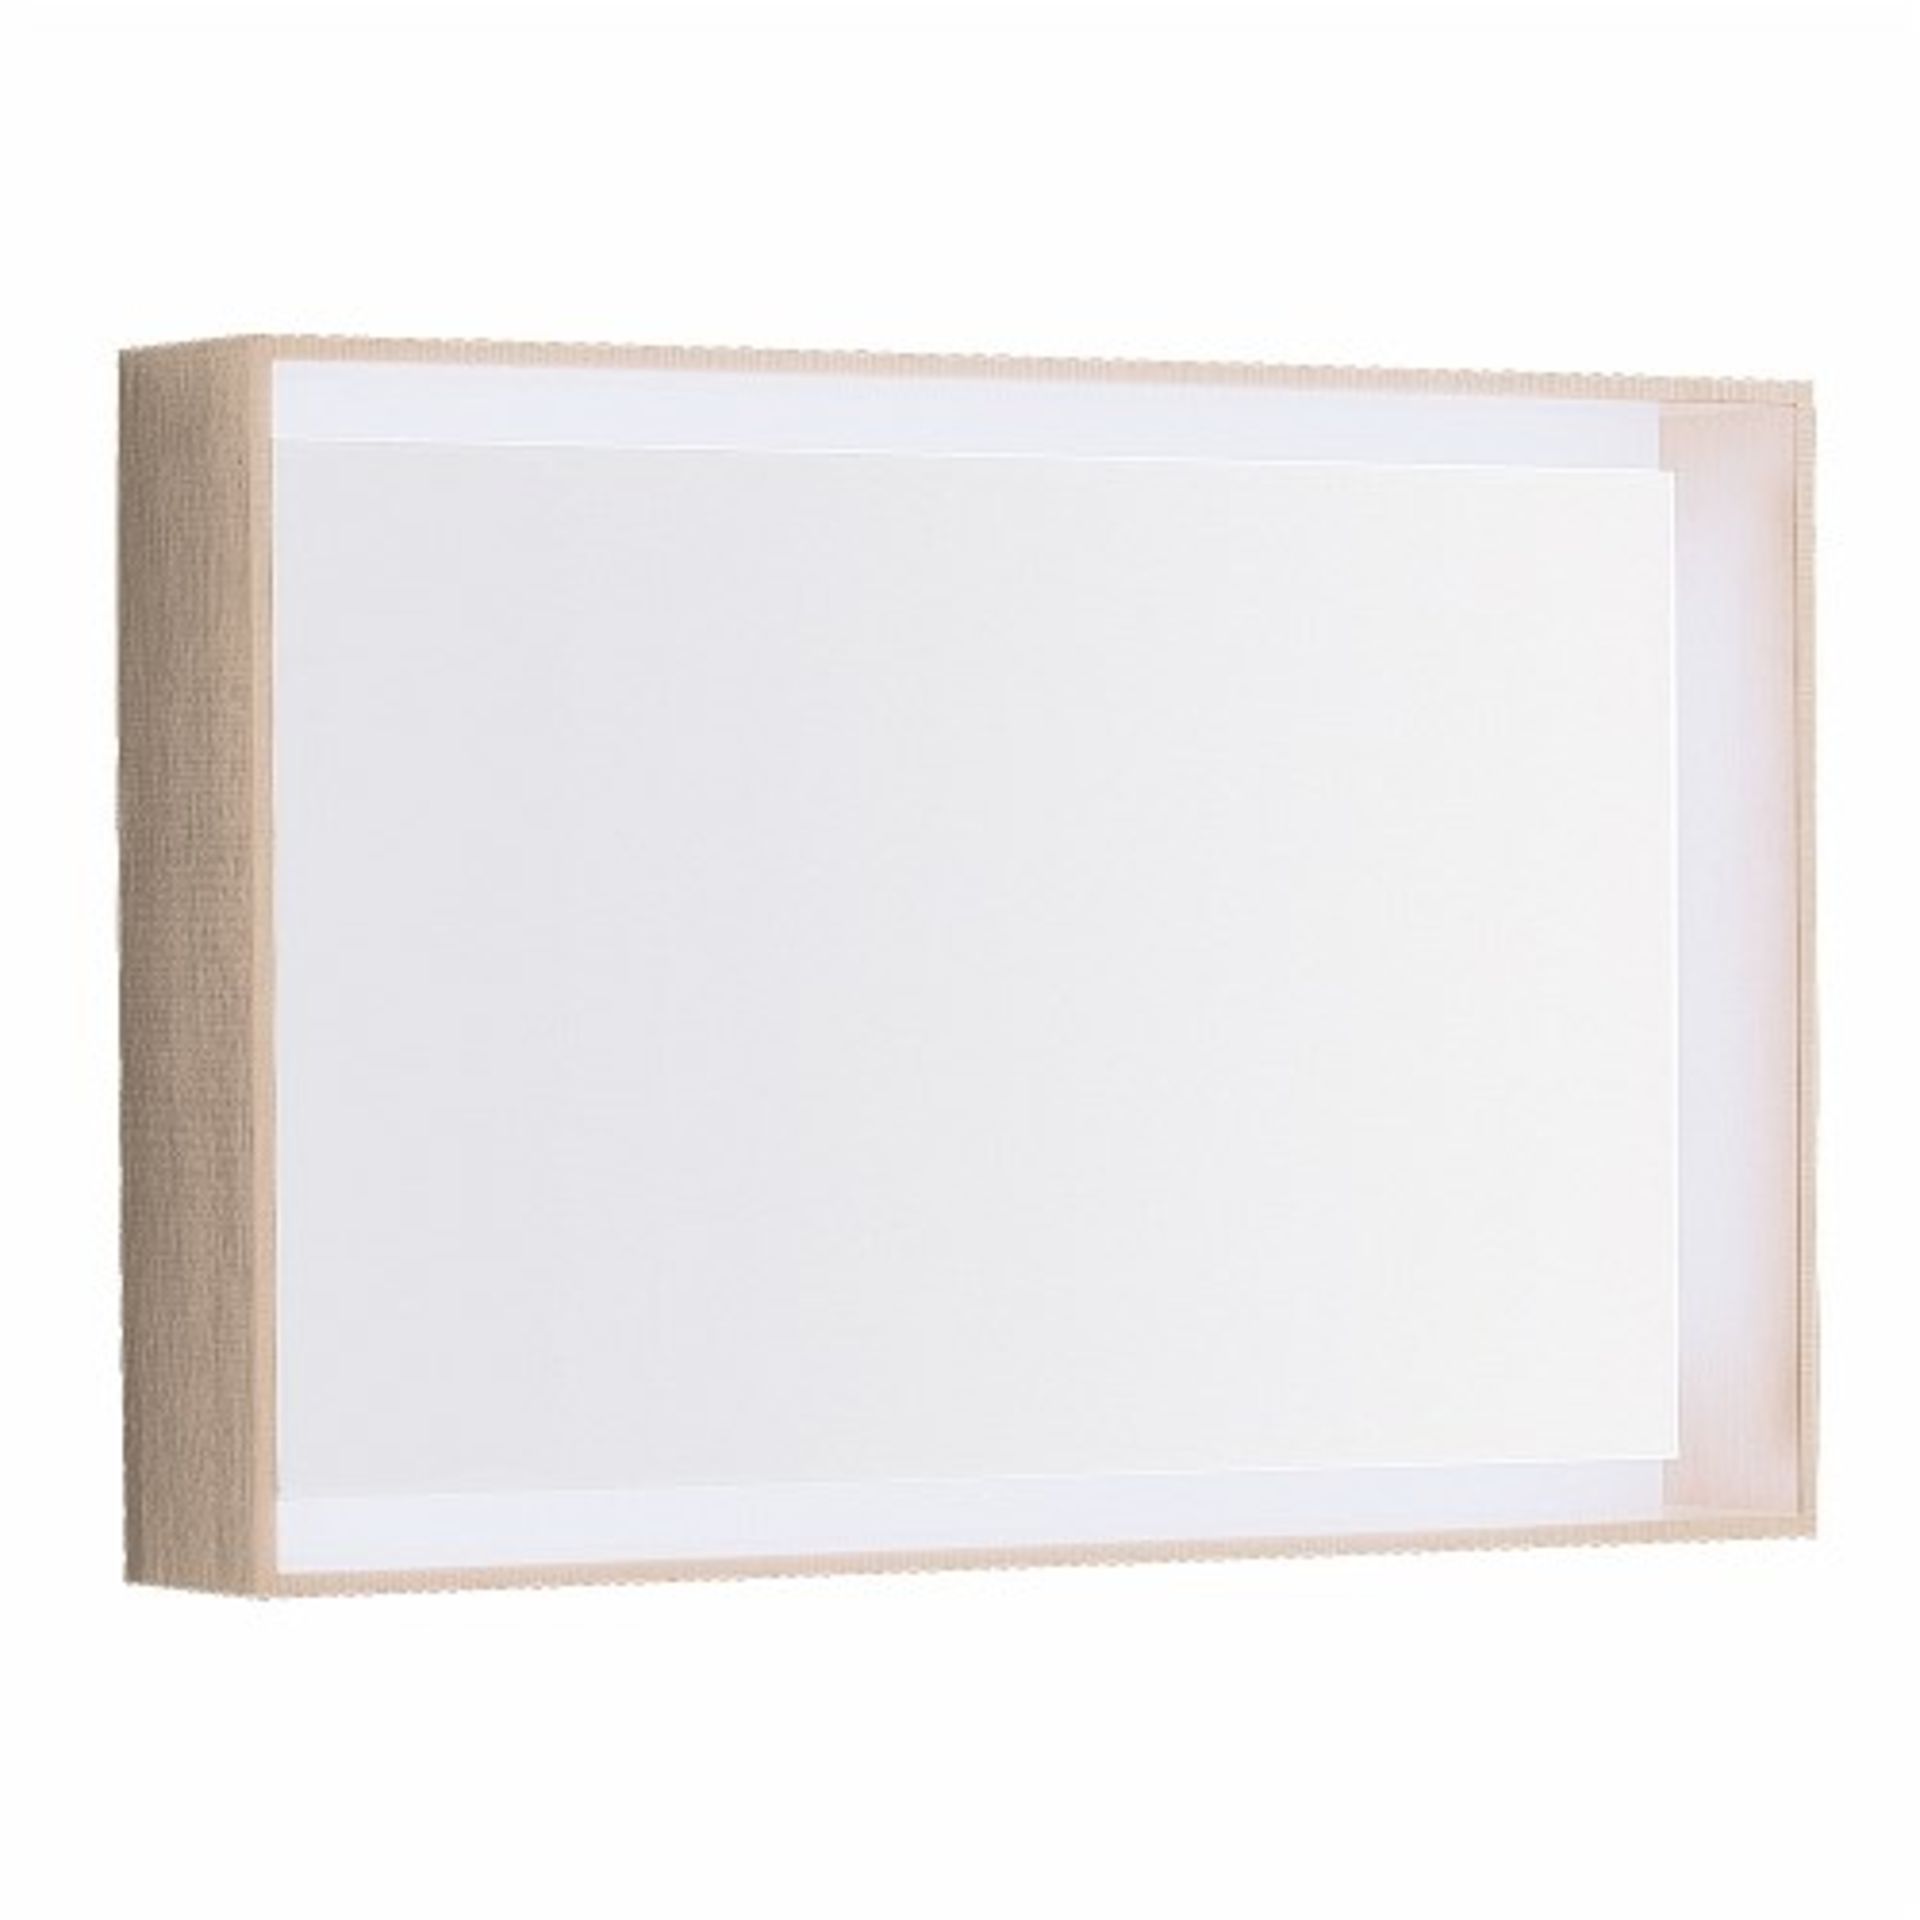 (XL134) Citterio Natural Beige illuminated Mirror.RRP £687.99.If youre looking for a touch o... - Image 2 of 3